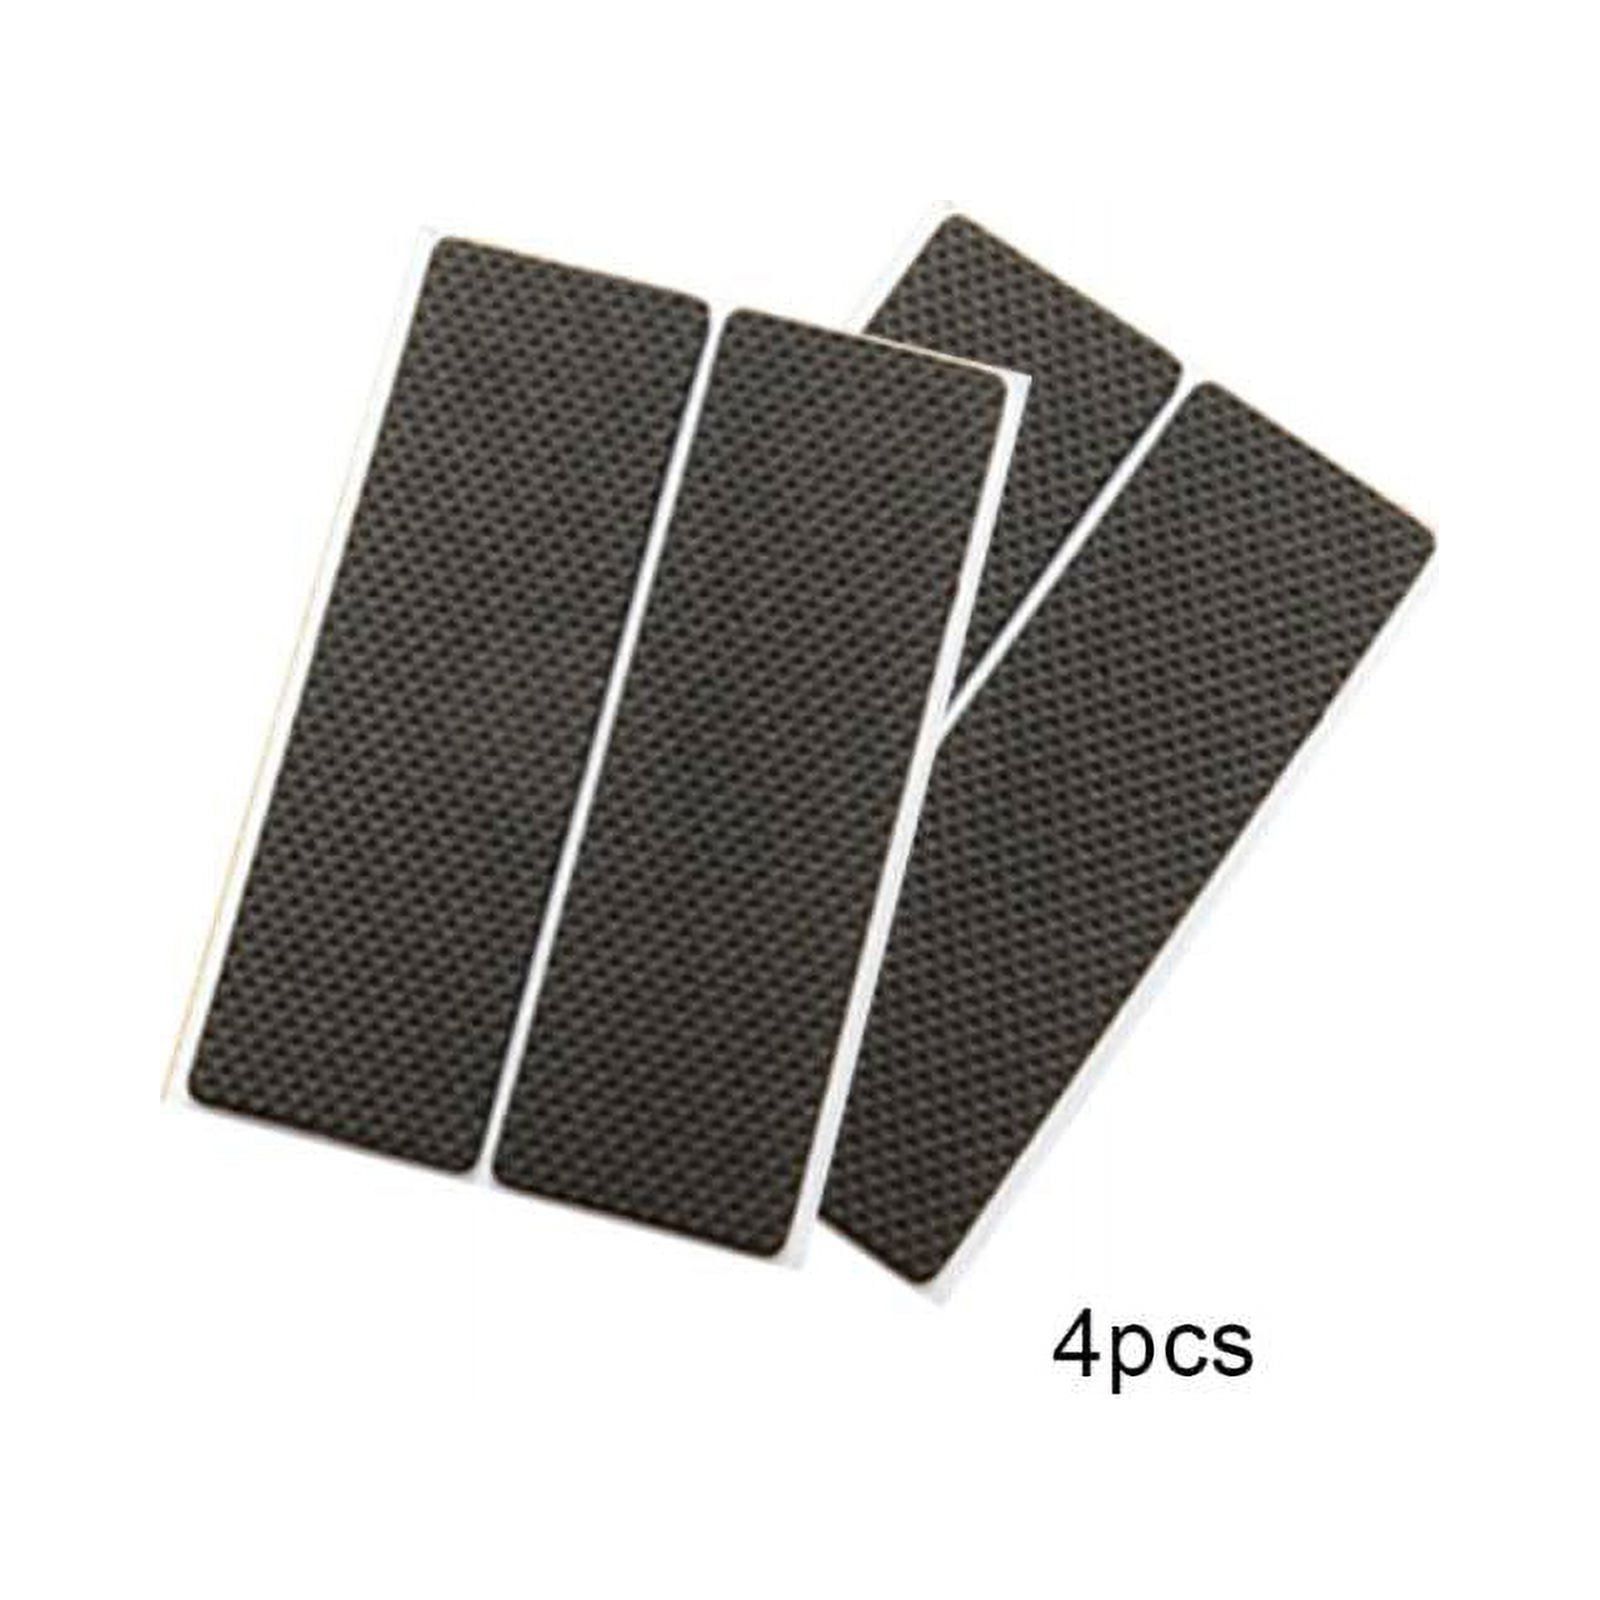 Non Slip Furniture Pads X-Protector Premium 8 Pcs 4 Furniture Pad! Best Furniture Grippers - Selfadhesive Rubber Feet Couch Stoppers Ideal Furniture